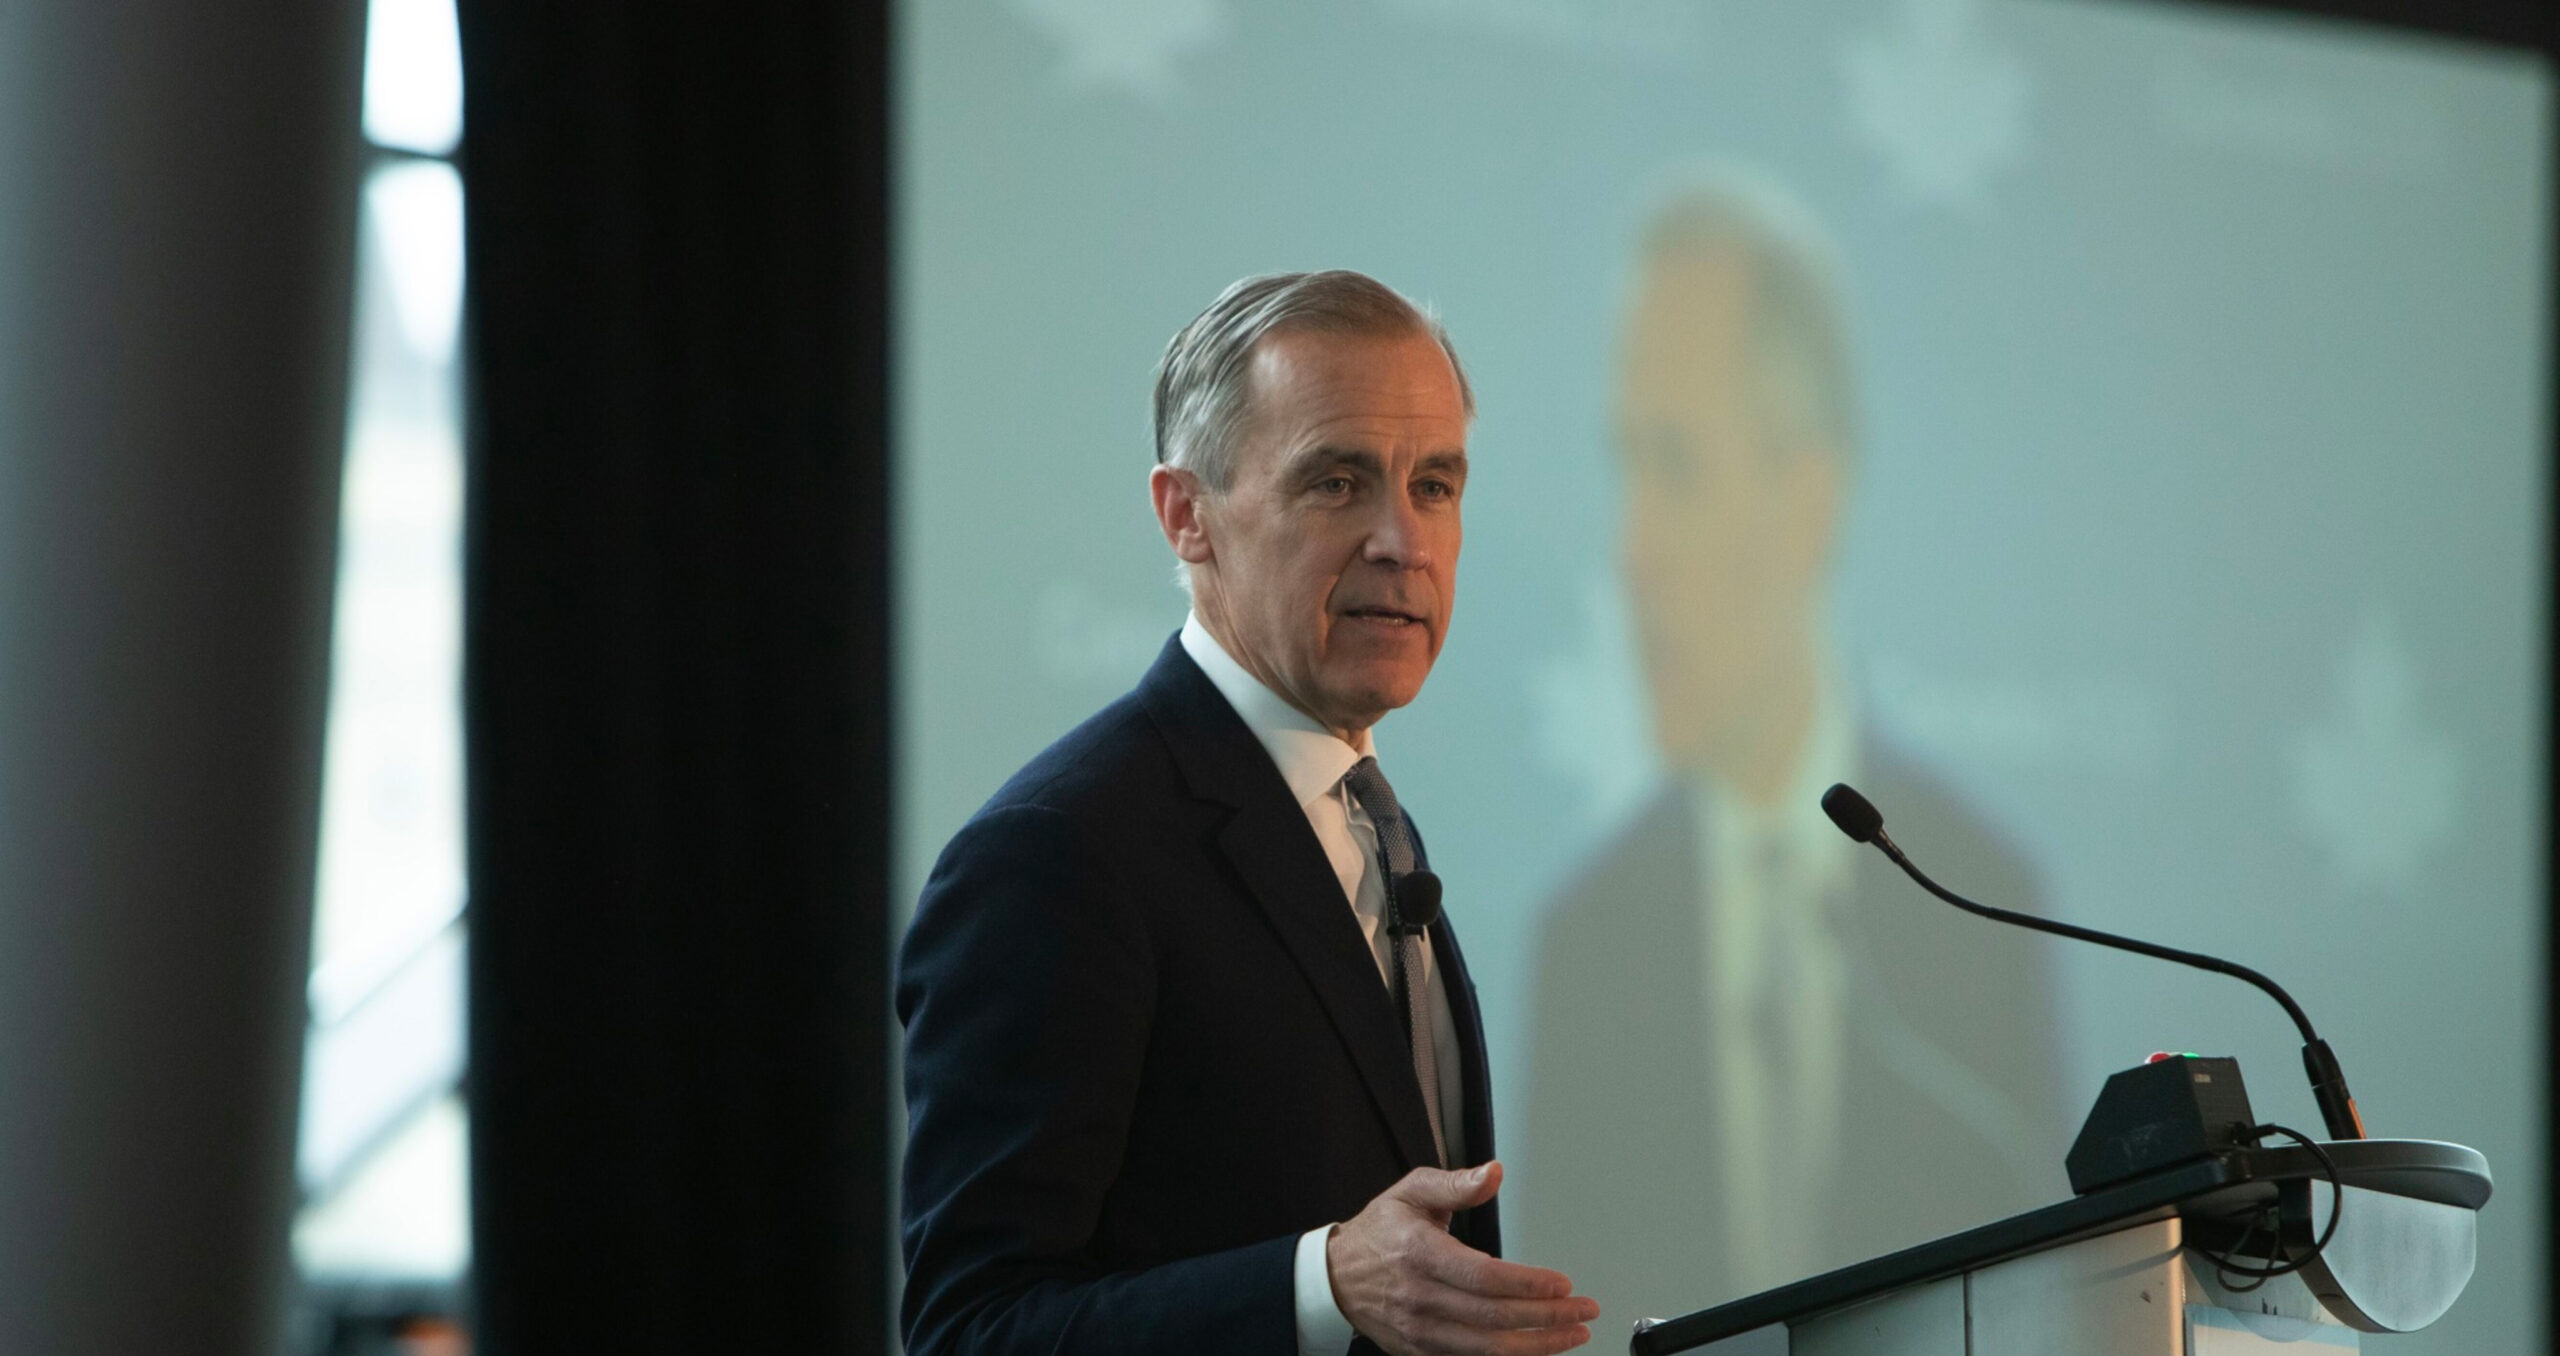 Mark Carney, former Bank of England governor and now UN special envoy for climate and finance, at the Net-Zero Leadership Summit in Ottawa, Canada in April 2023. Carney announced the creation of Gfanz in 2021. (Photo: David Kawai/Bloomberg) 